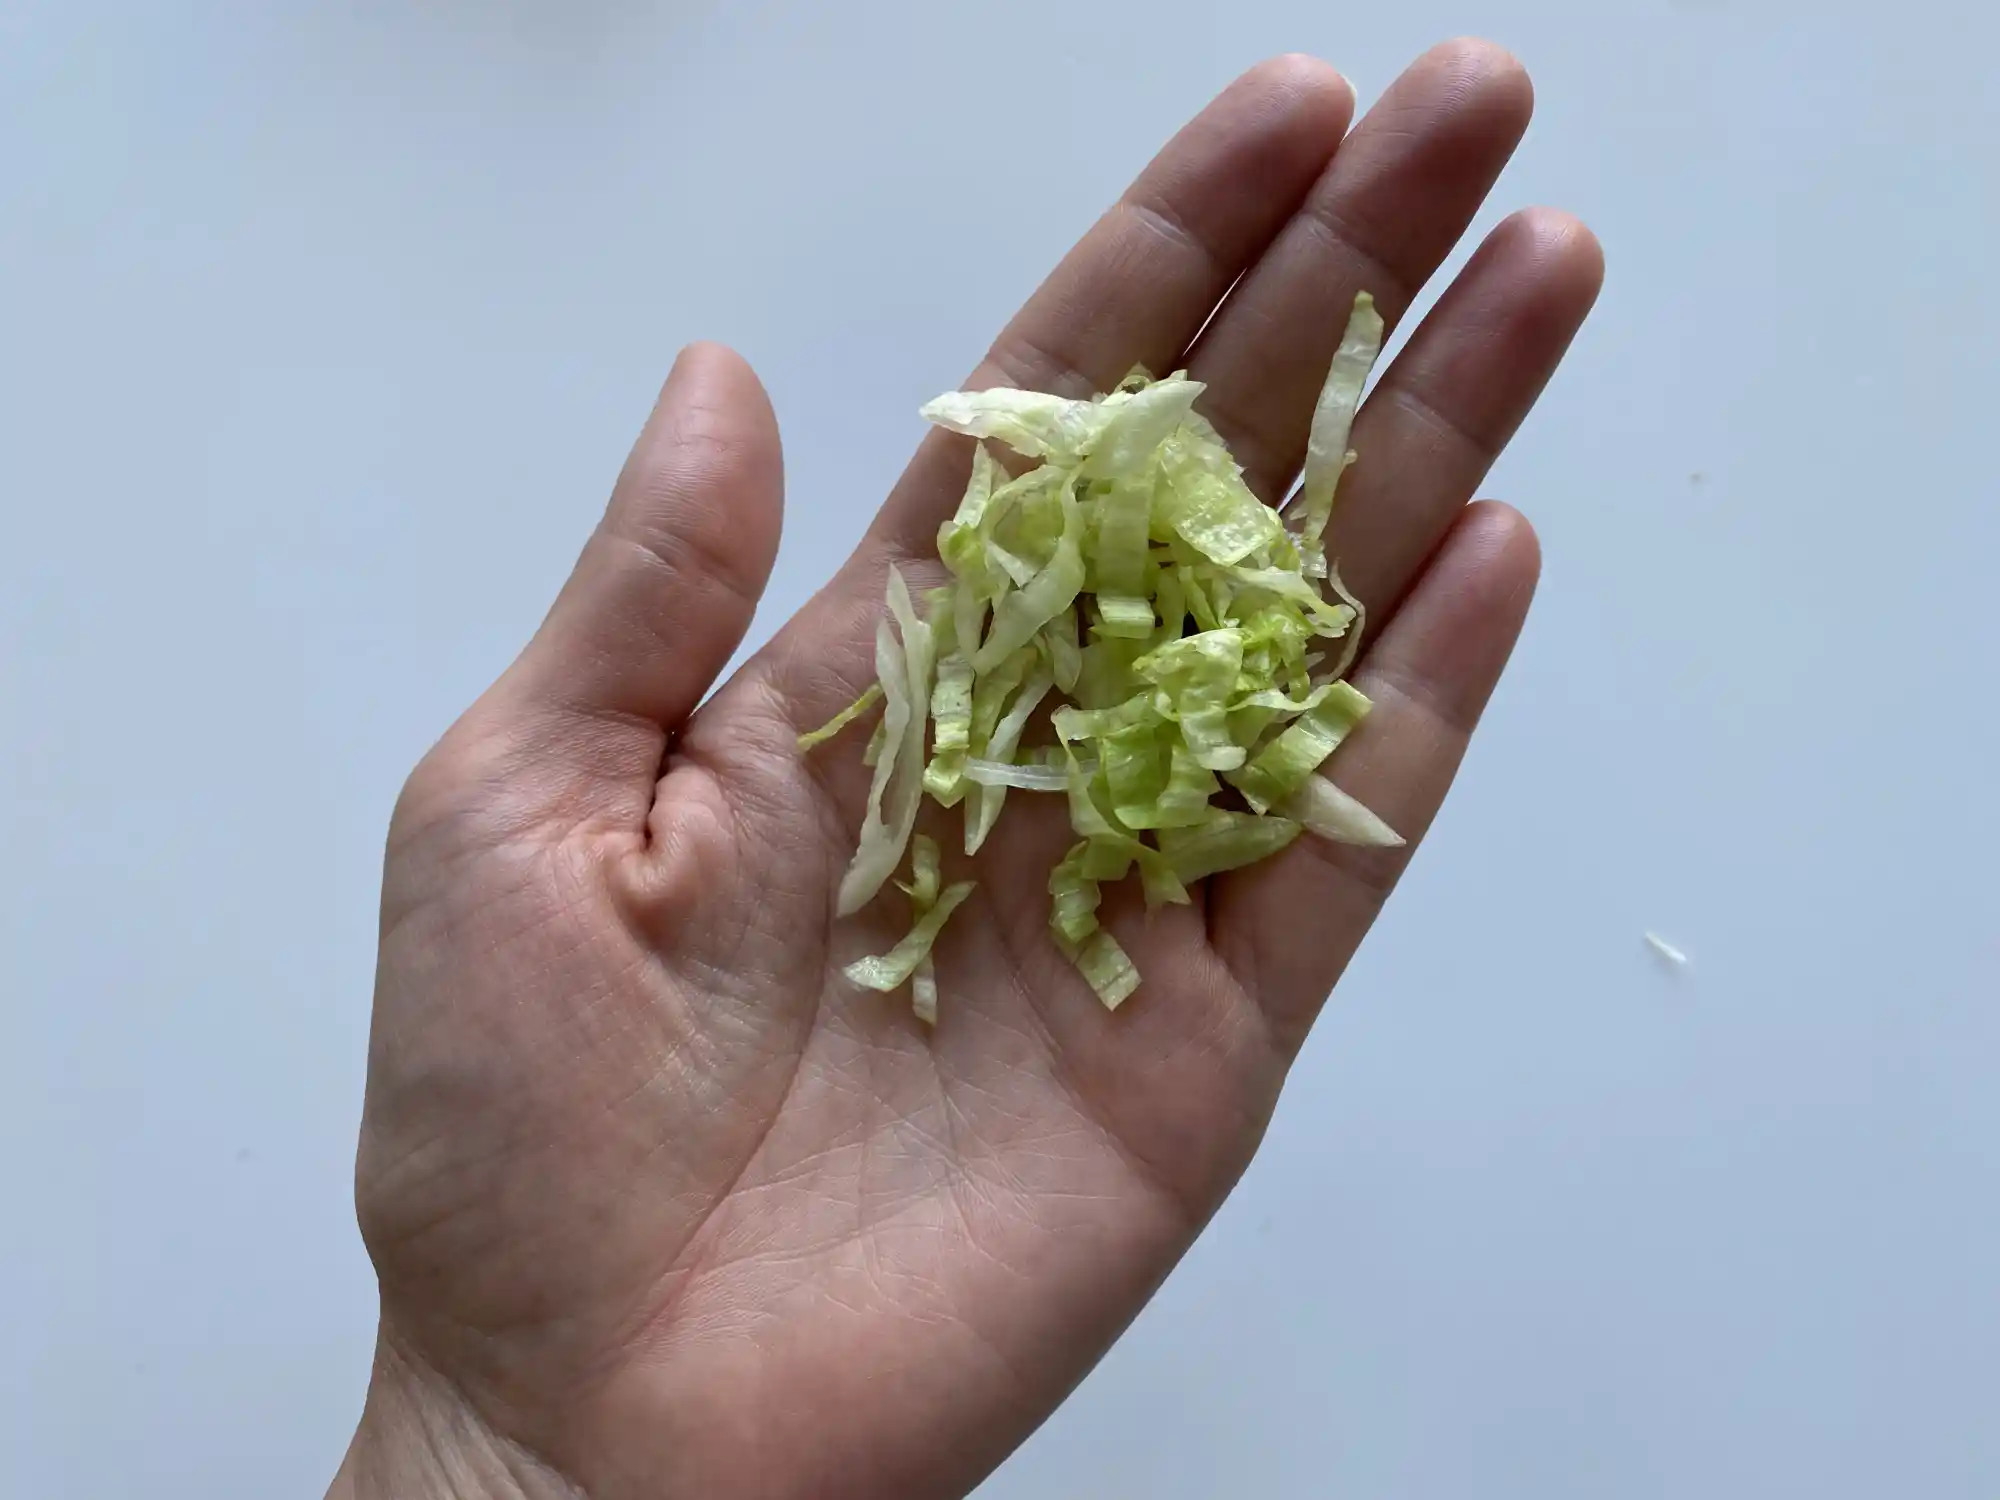 a hand holding a small amount of shredded iceberg lettuce